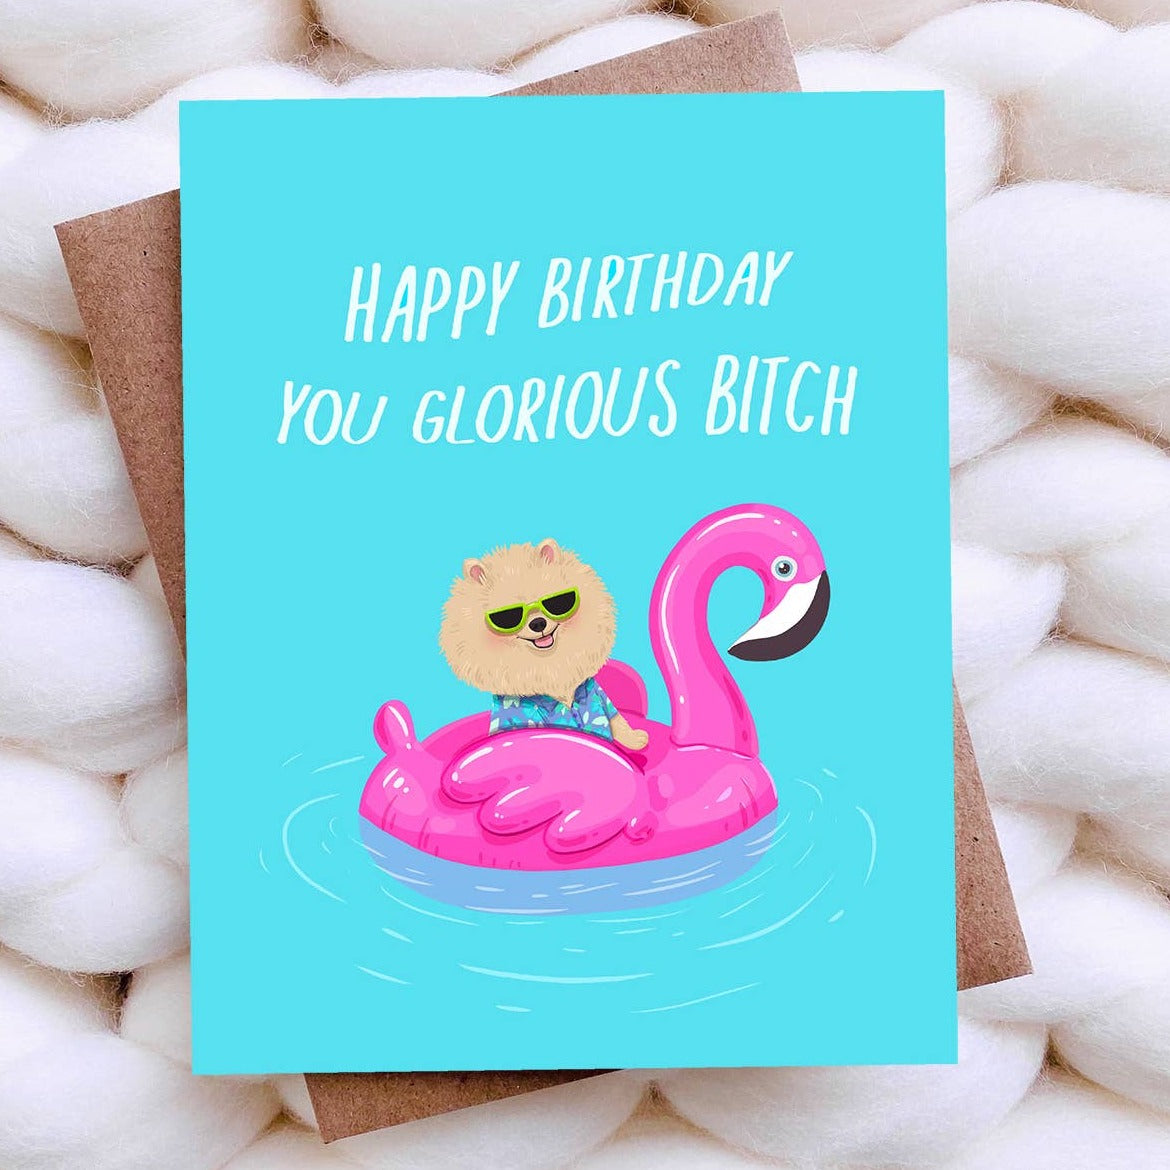 Top Hat and Monocle | Happy Birthday You Glorious Bitch Greeting Card, The Local Space, Local Canadian Brands 